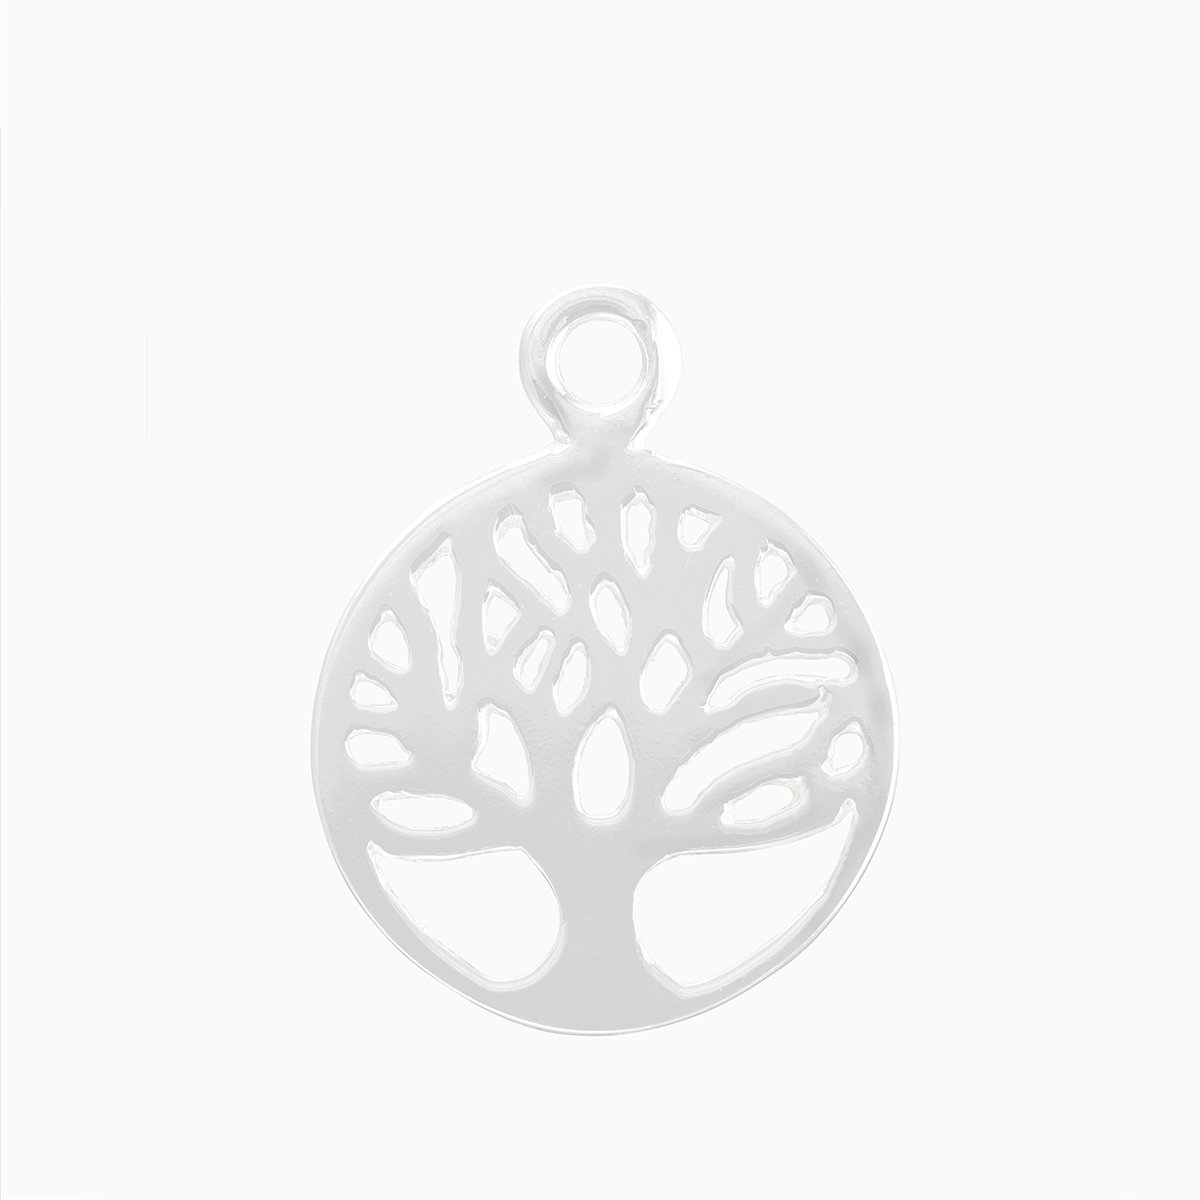 Product title: Tree of Life Silver Charm, product type: Charm